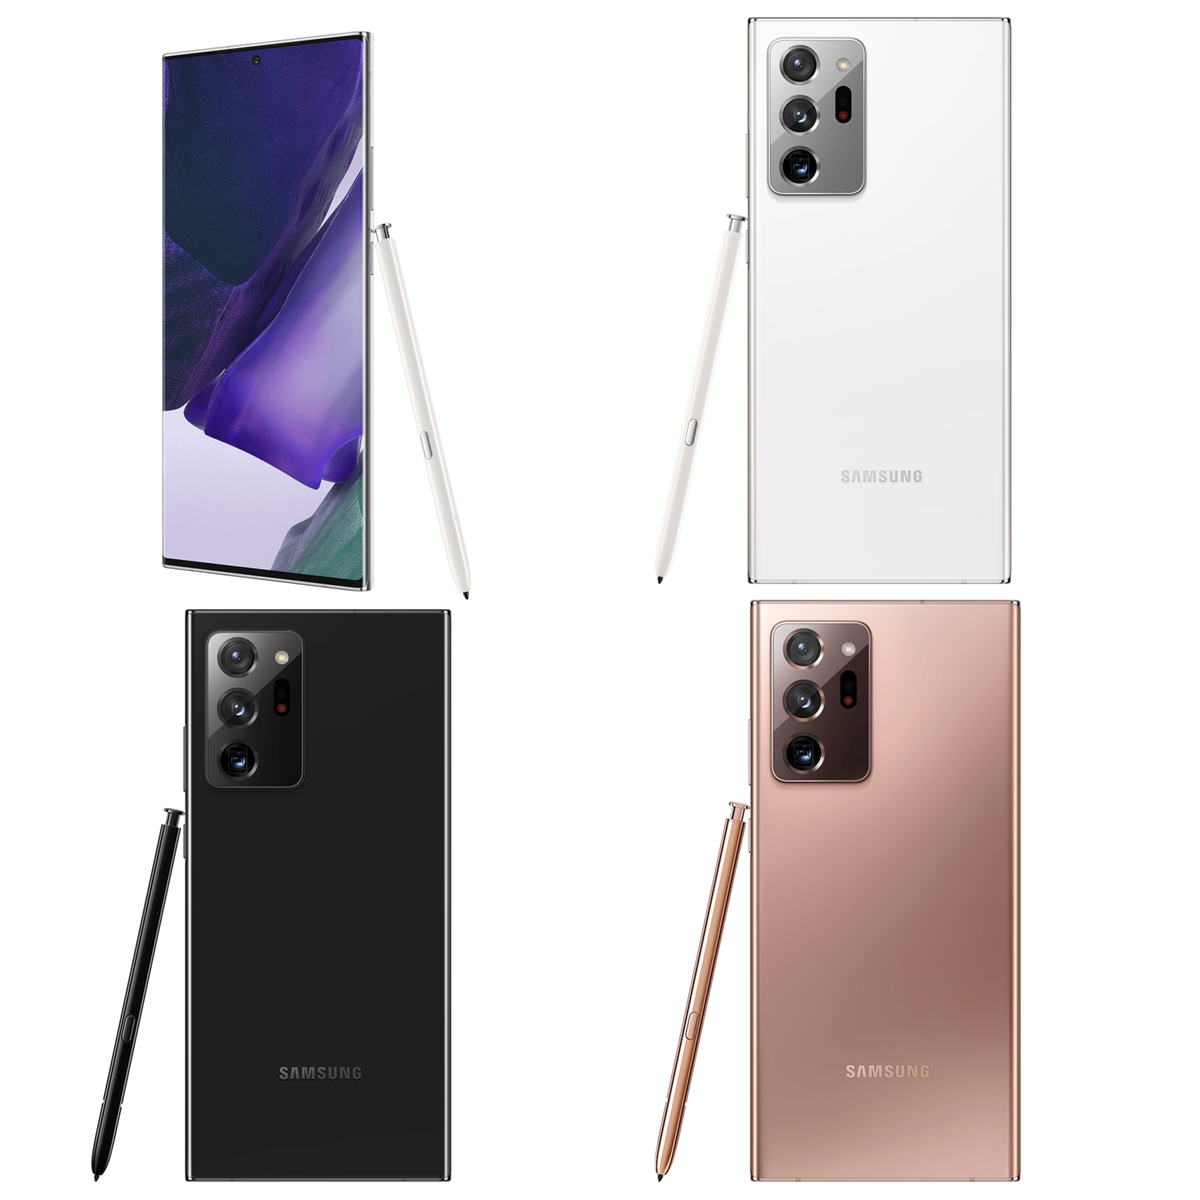  Samsung Galaxy Note 20 Ultra in Mystic Black, Mystic White, and Mystic Bronze - The Galaxy Note 20 & Note 20 Ultra 5G could be very expensive